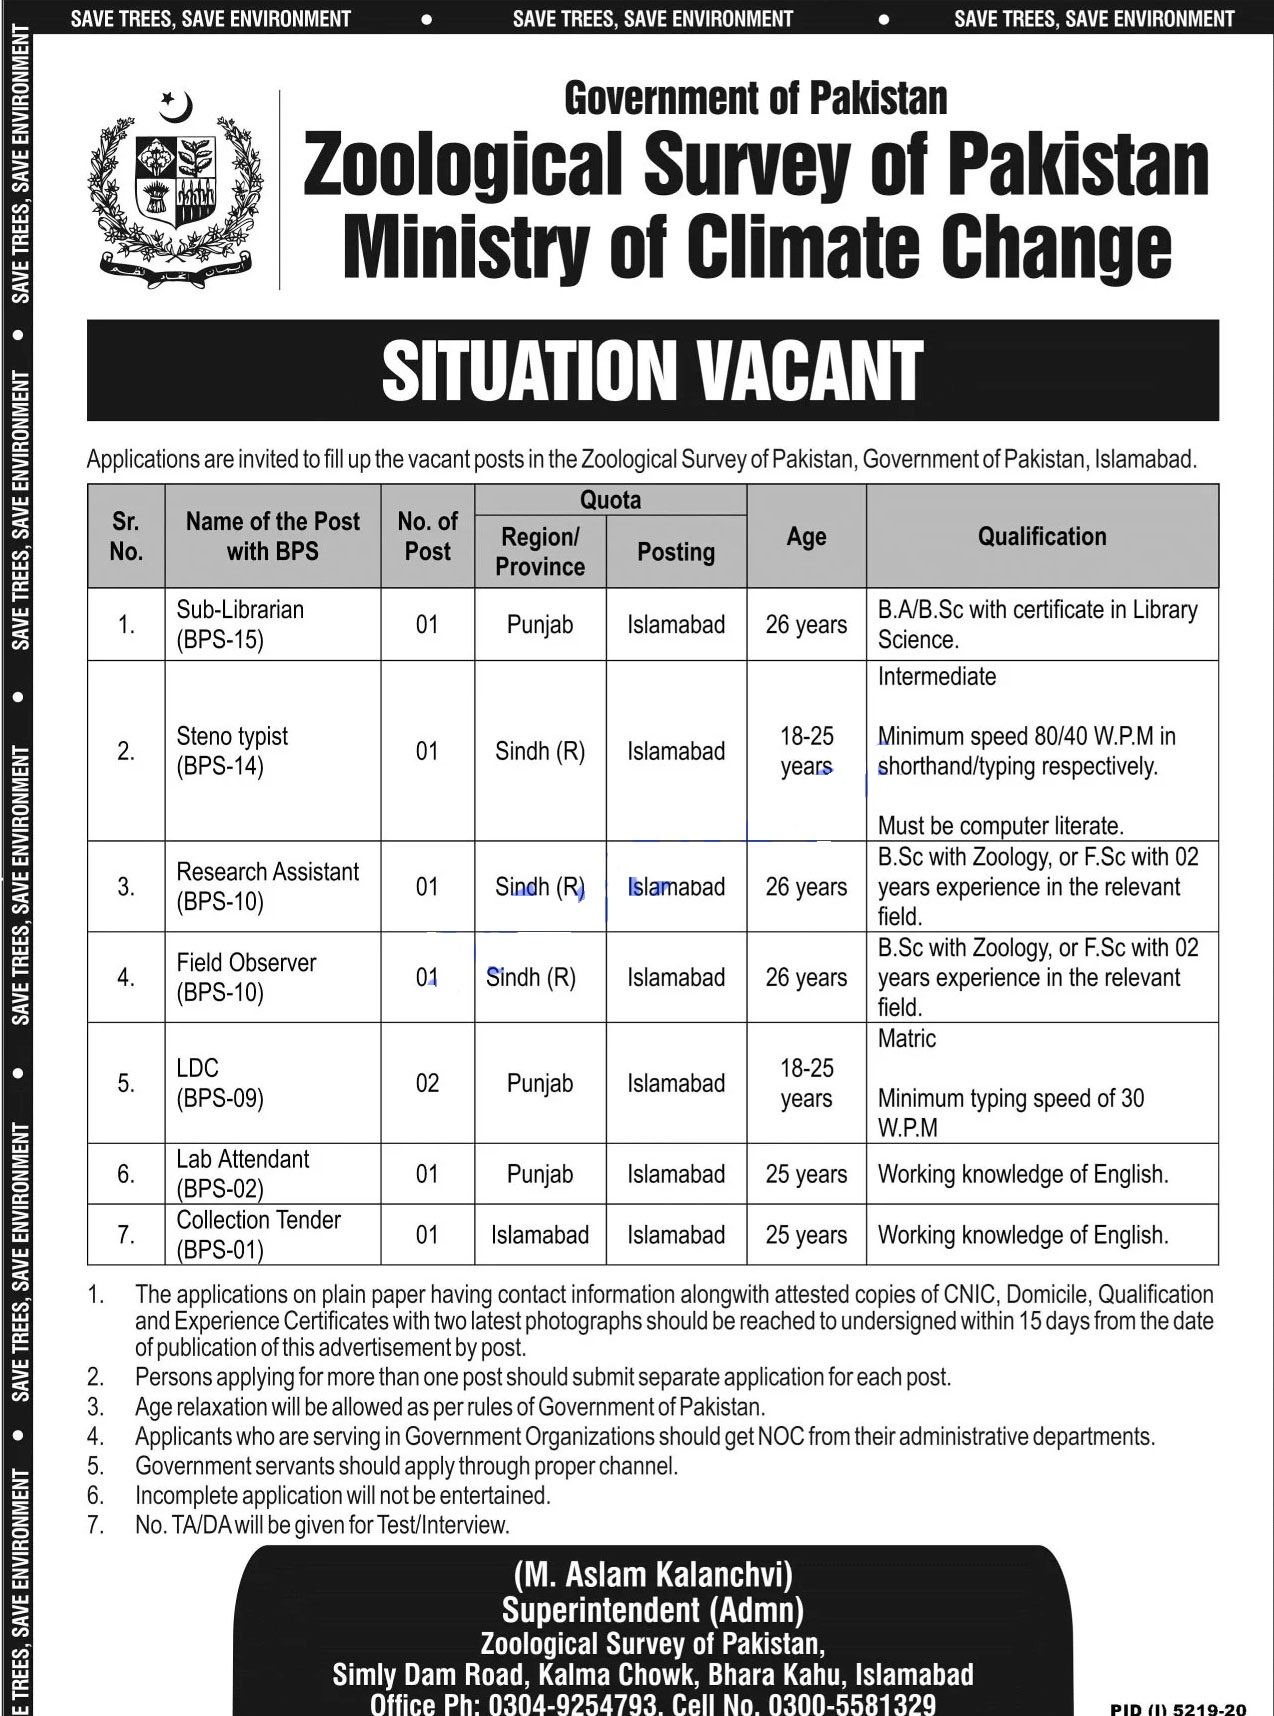 Ministry of Climate Change Jobs in Islamabad 2021